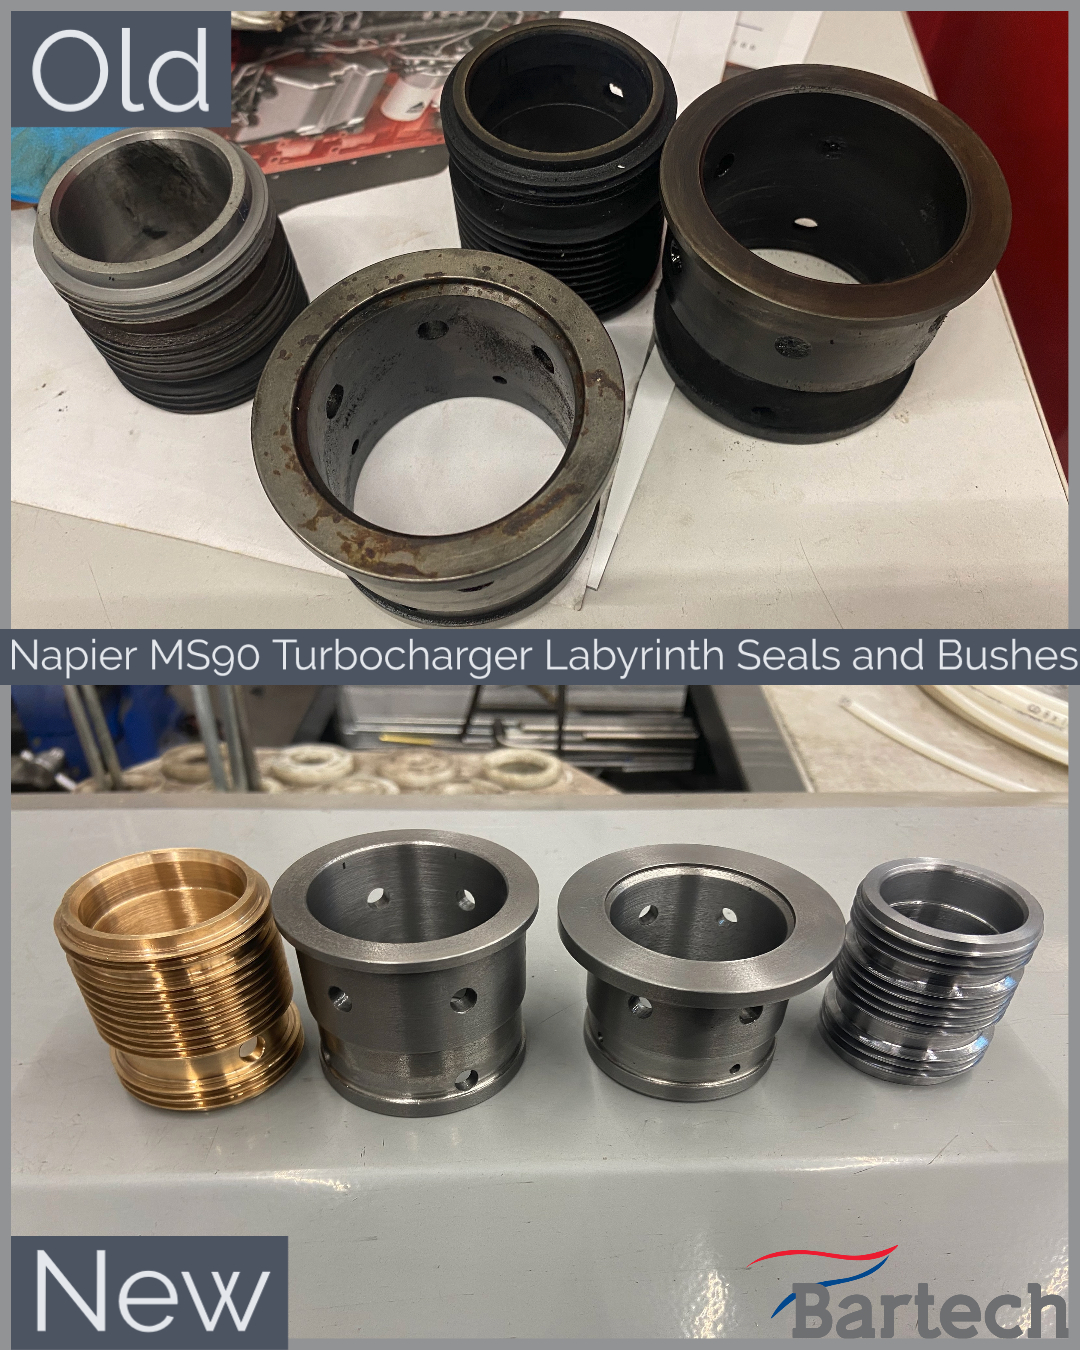 Napier MS90 Turbocharger Labyrinth Seals and Bushes made in house at Bartech